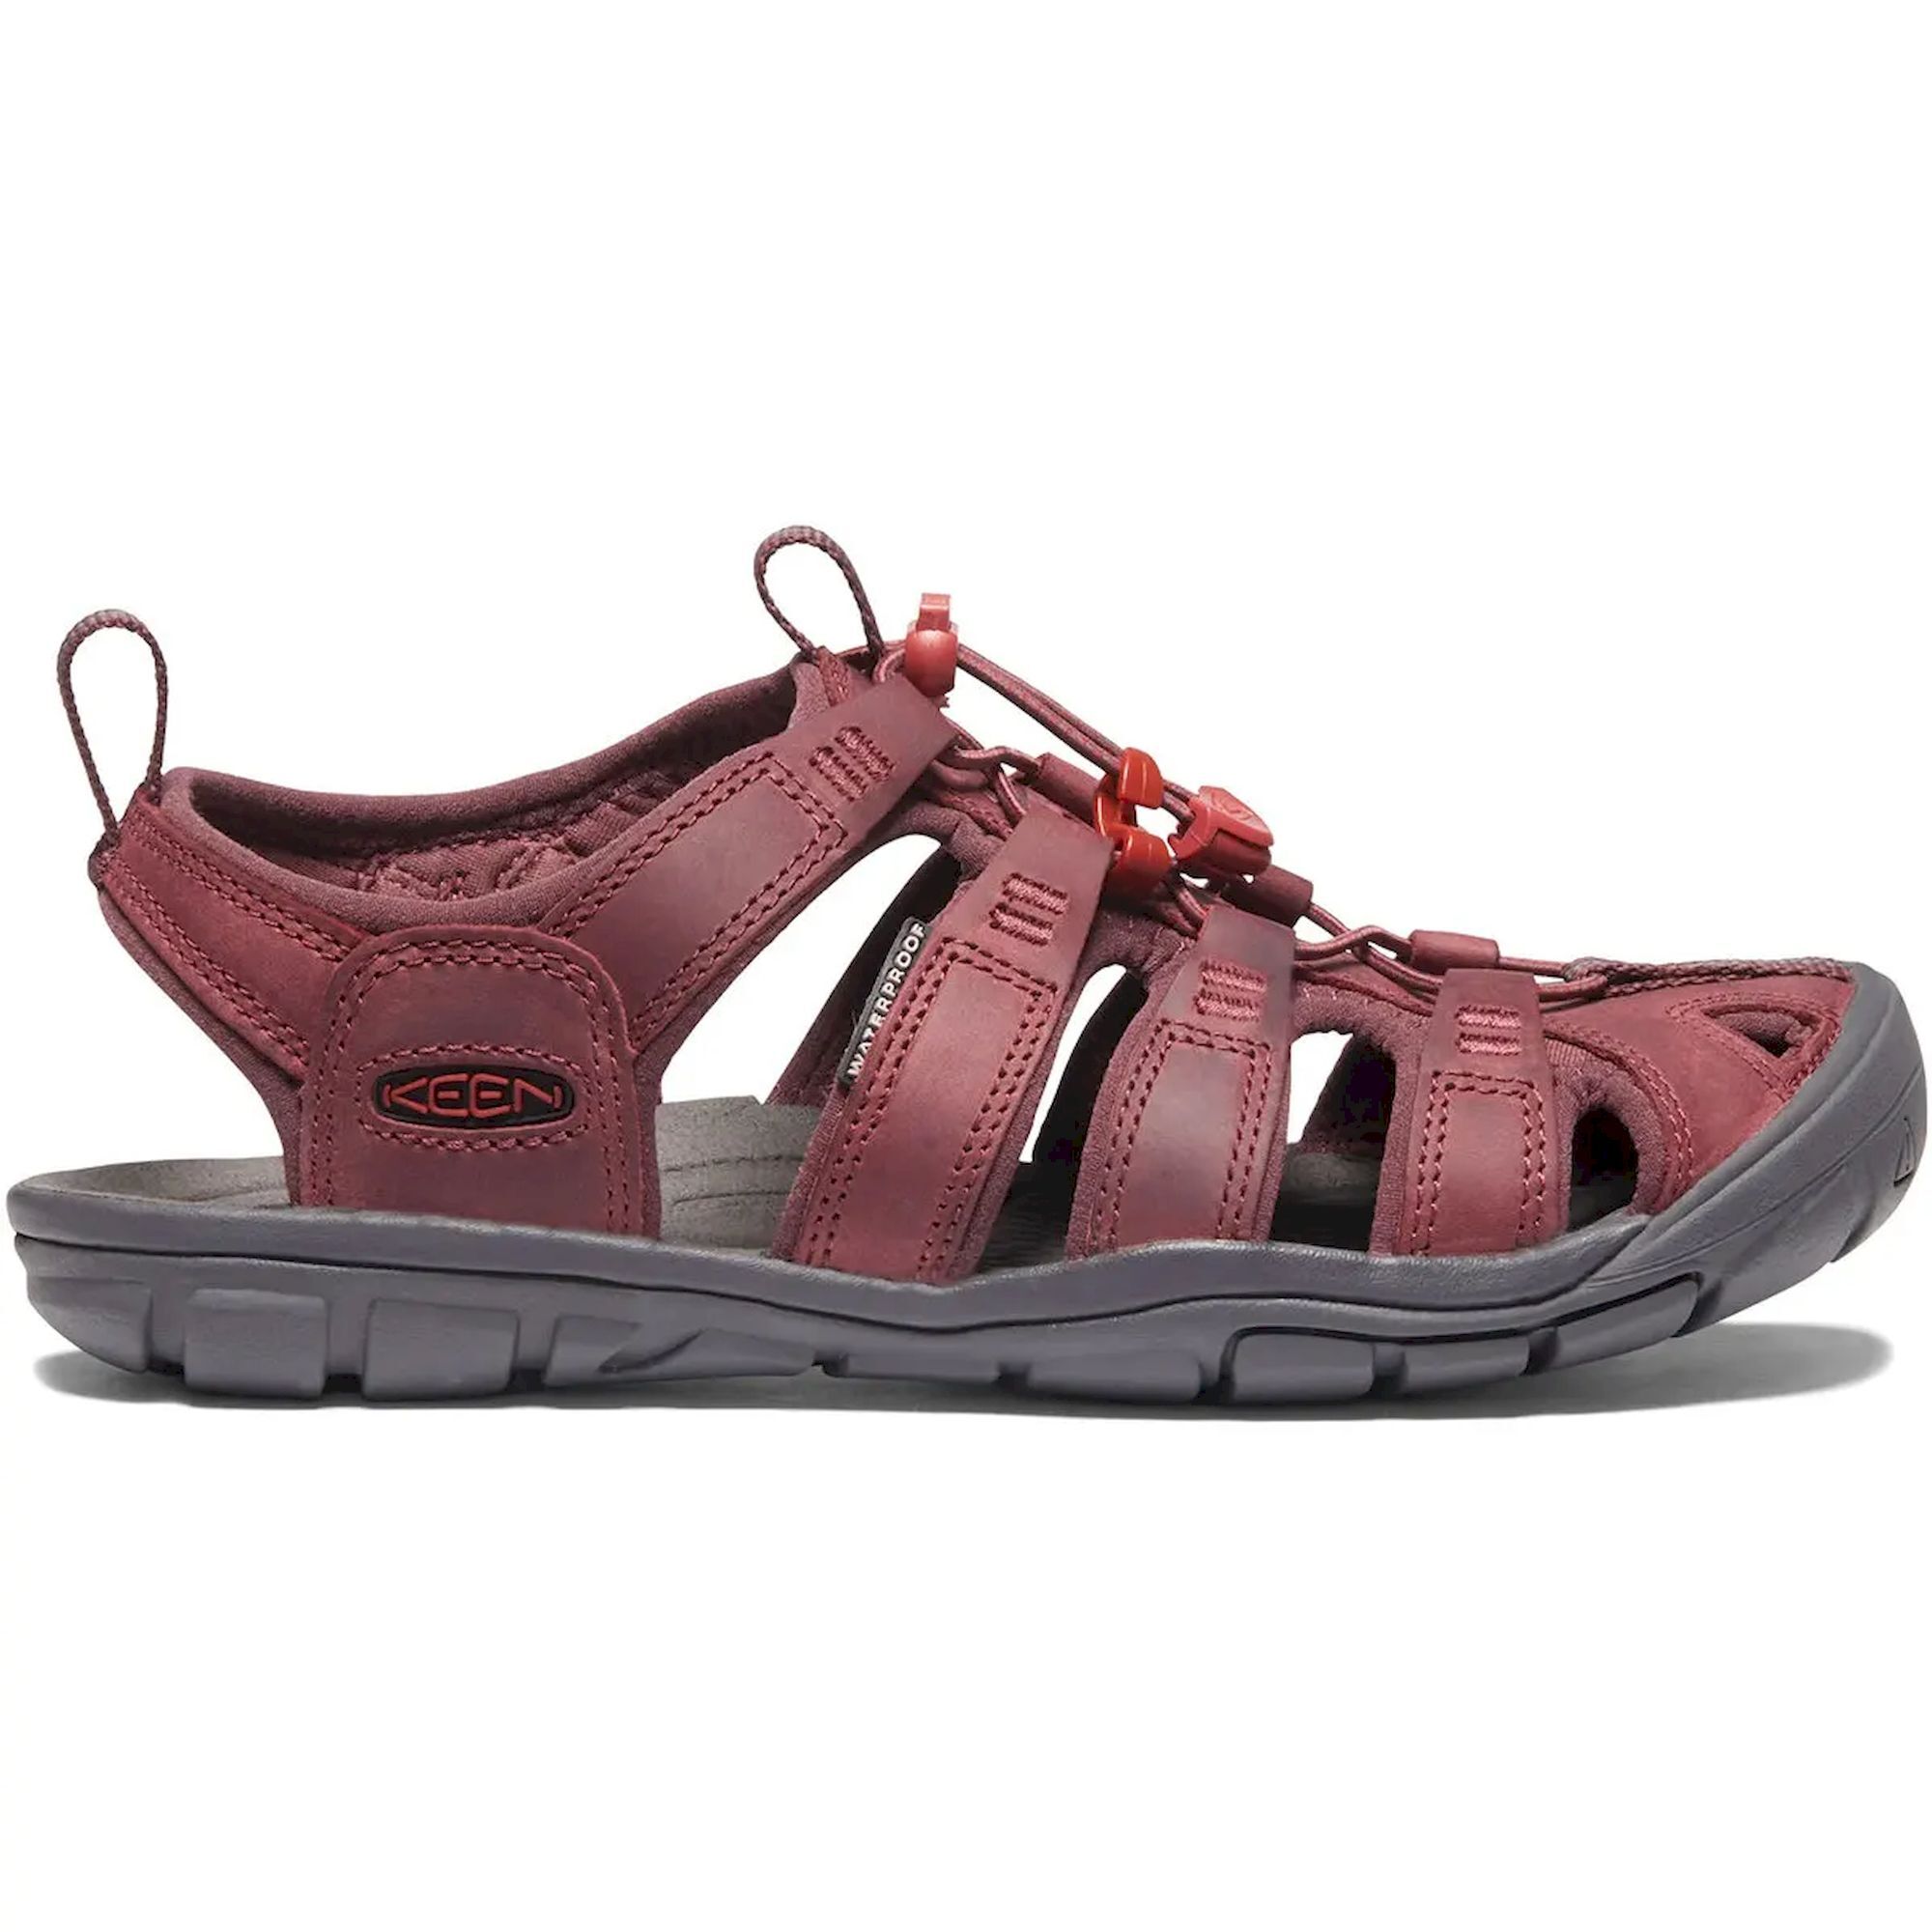 Keen Clearwater CNX Leather - Walking sandals - Women's